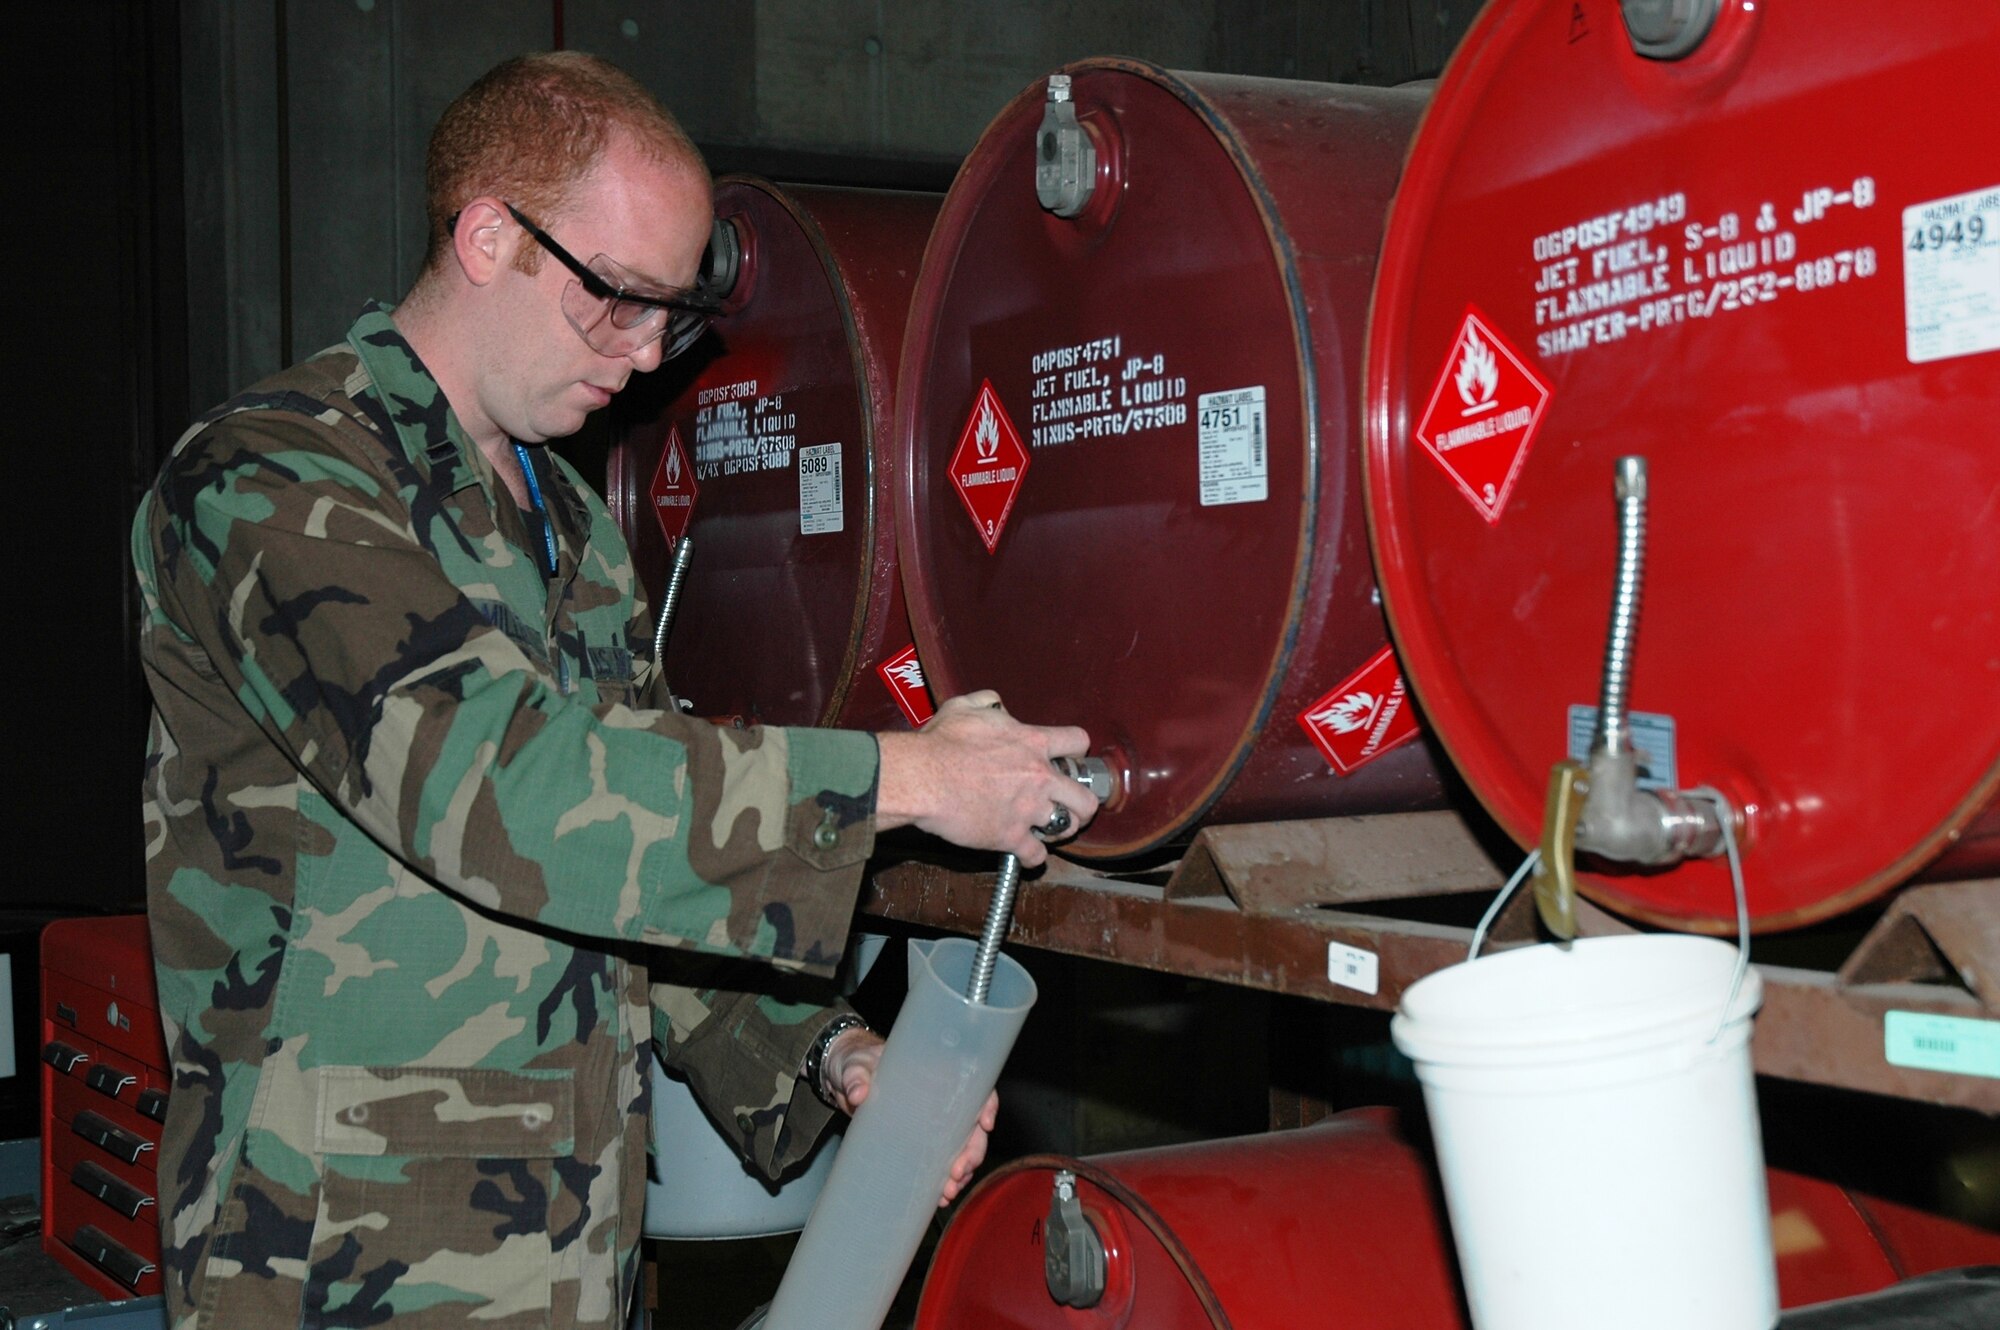 First Lt. Jeremiah Miller draws a fuel sample from jet fuel stocks at the Air Force Research Laboratory’s Propulsion Directorate for alternative fuels experiments. The lab is at the forefront of synthetic fuel research in support of the Office of the Secretary of Defense Assured Fuels Initiative. (Air Force photo by Adrian DeNardo) 